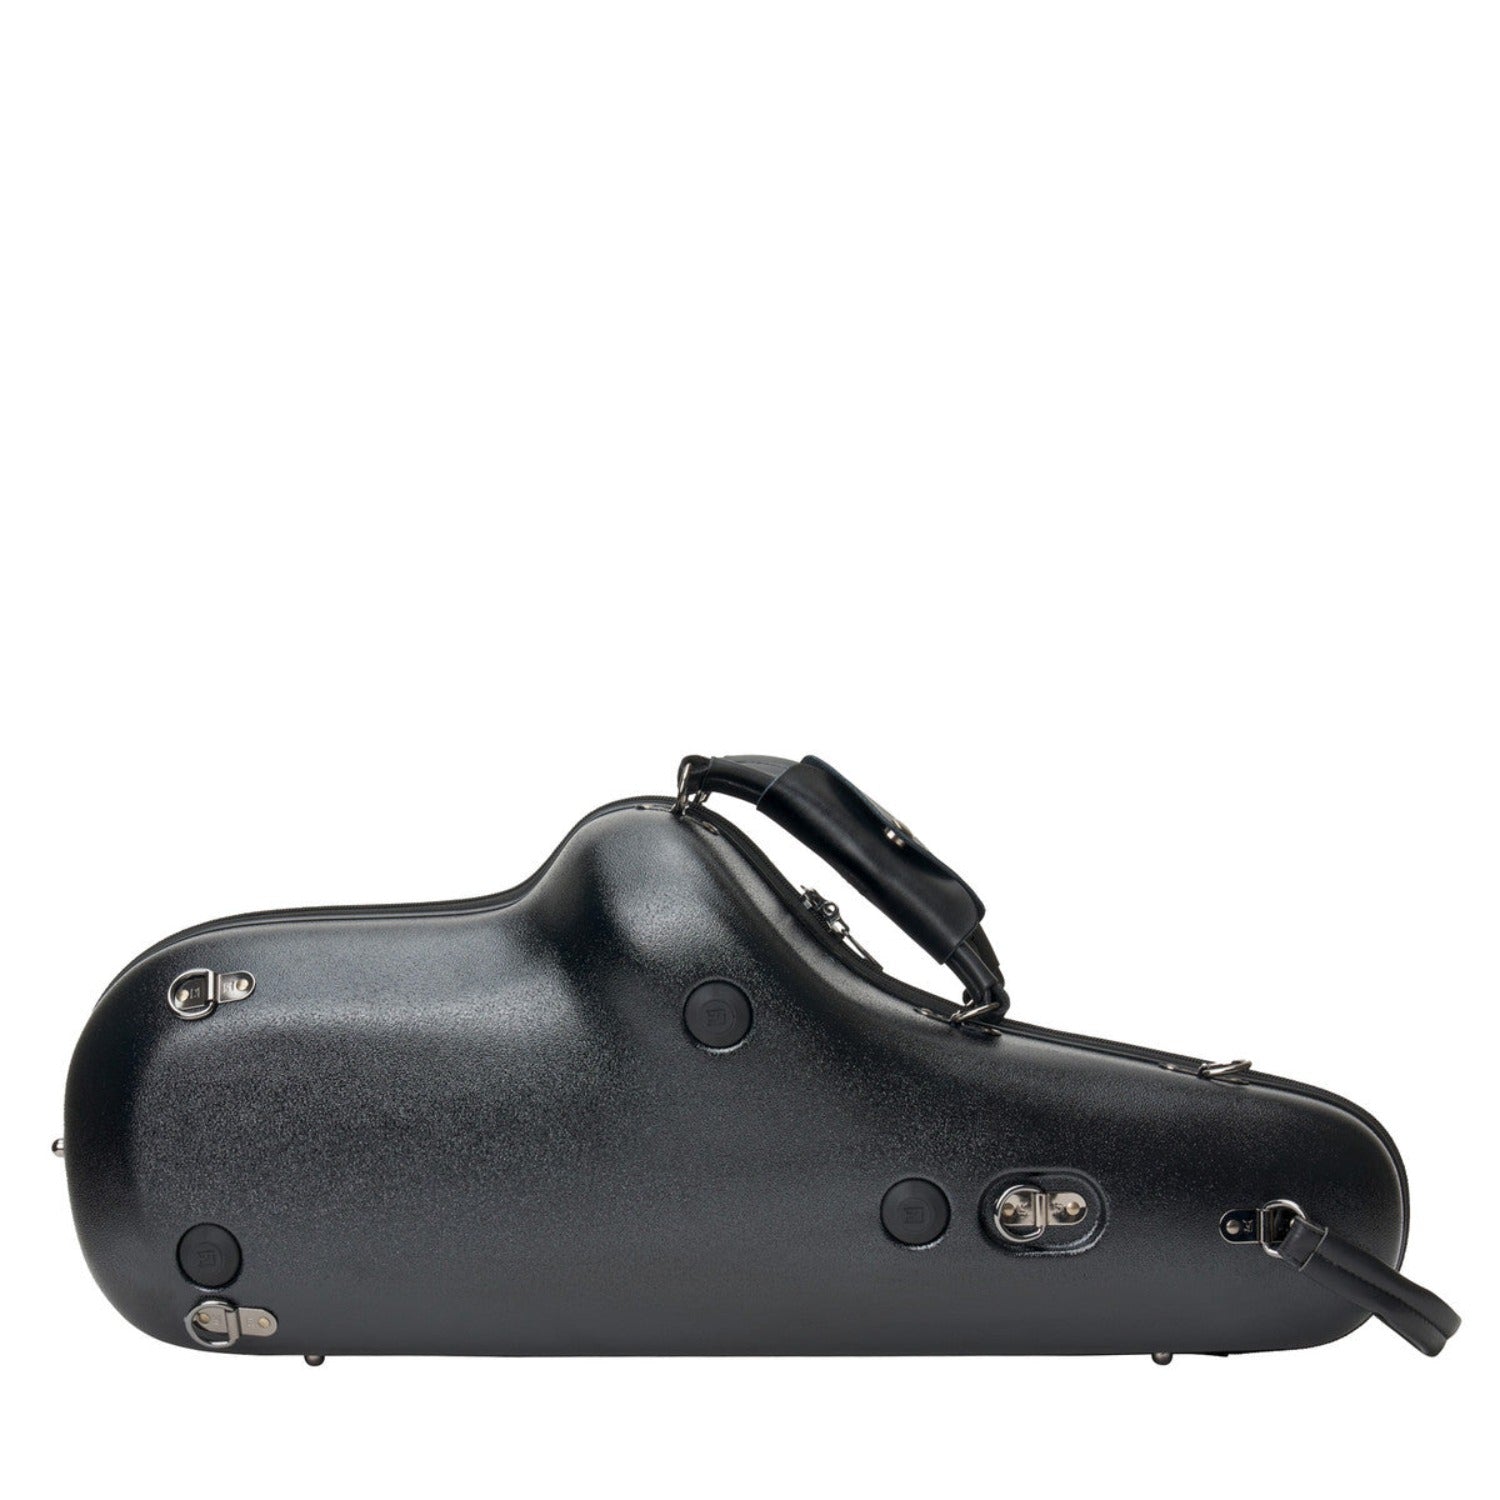 Protec Micro Alto Sax case, laying on its spine, with the back side facing the camera; no backpack straps attached, showing the D-rings for attaching them, against white background